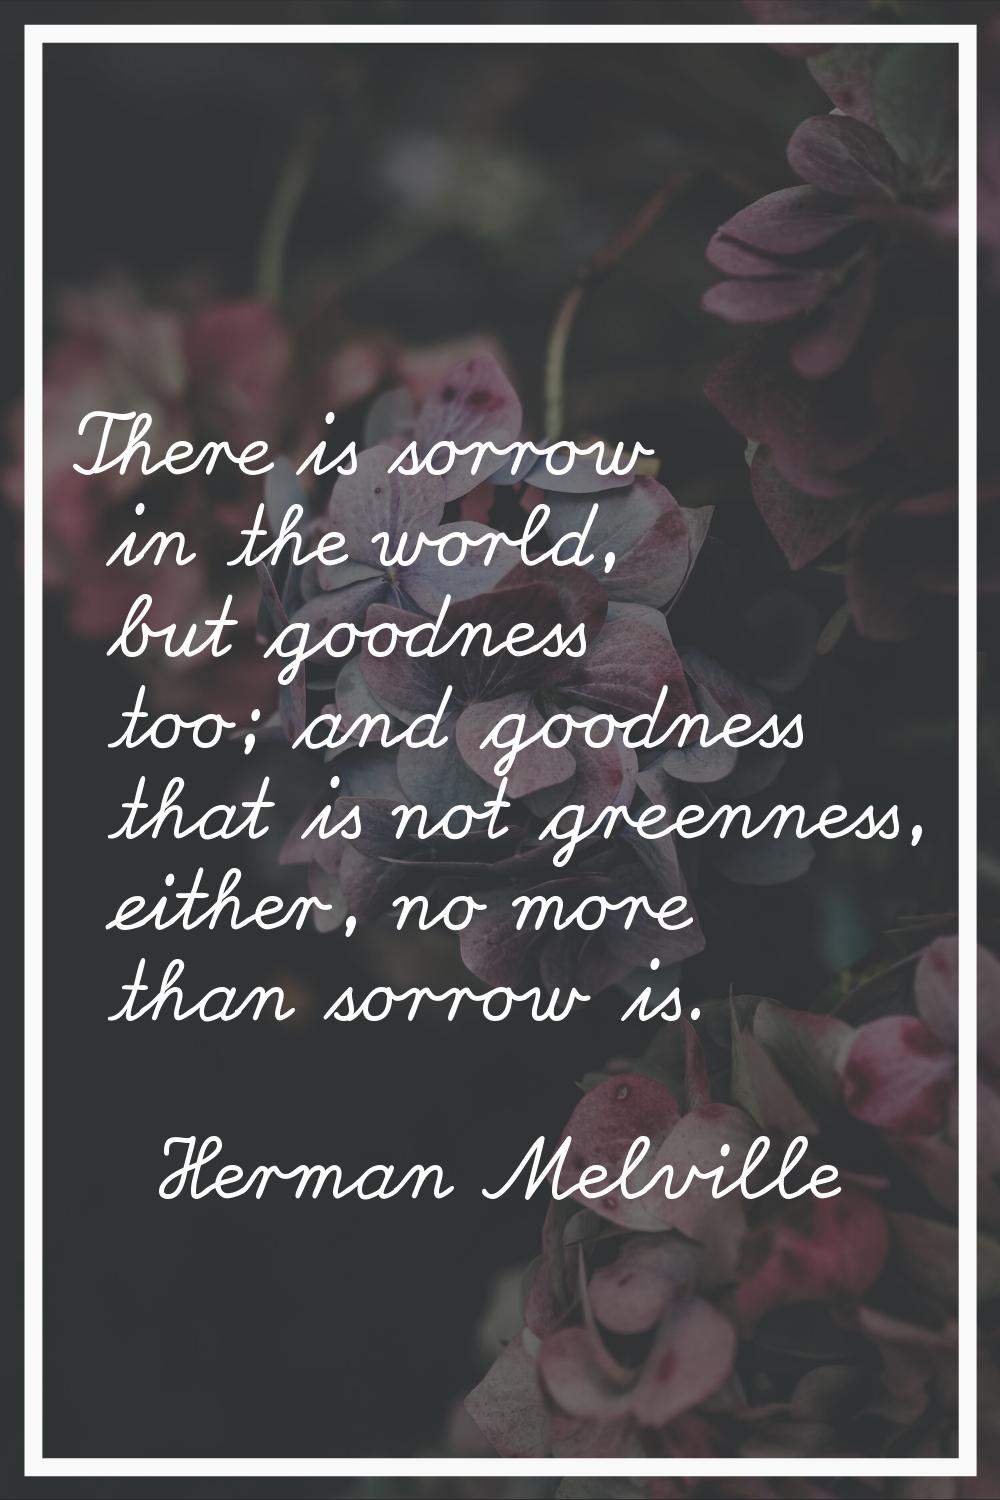 There is sorrow in the world, but goodness too; and goodness that is not greenness, either, no more